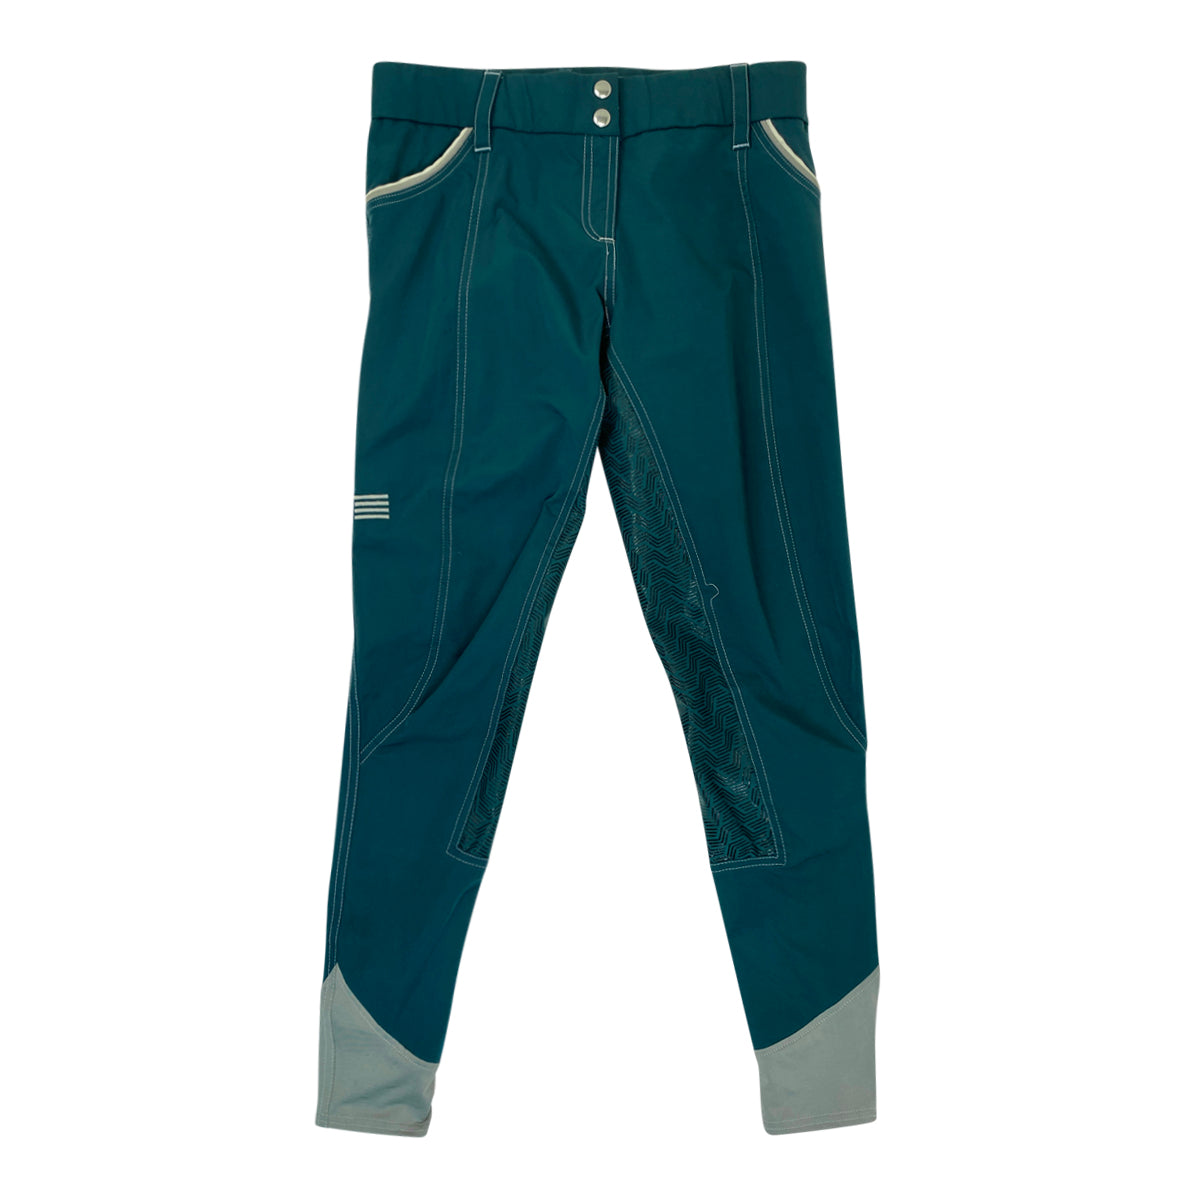 Ghodho 'Adena' Full Seat Breeches in Teal